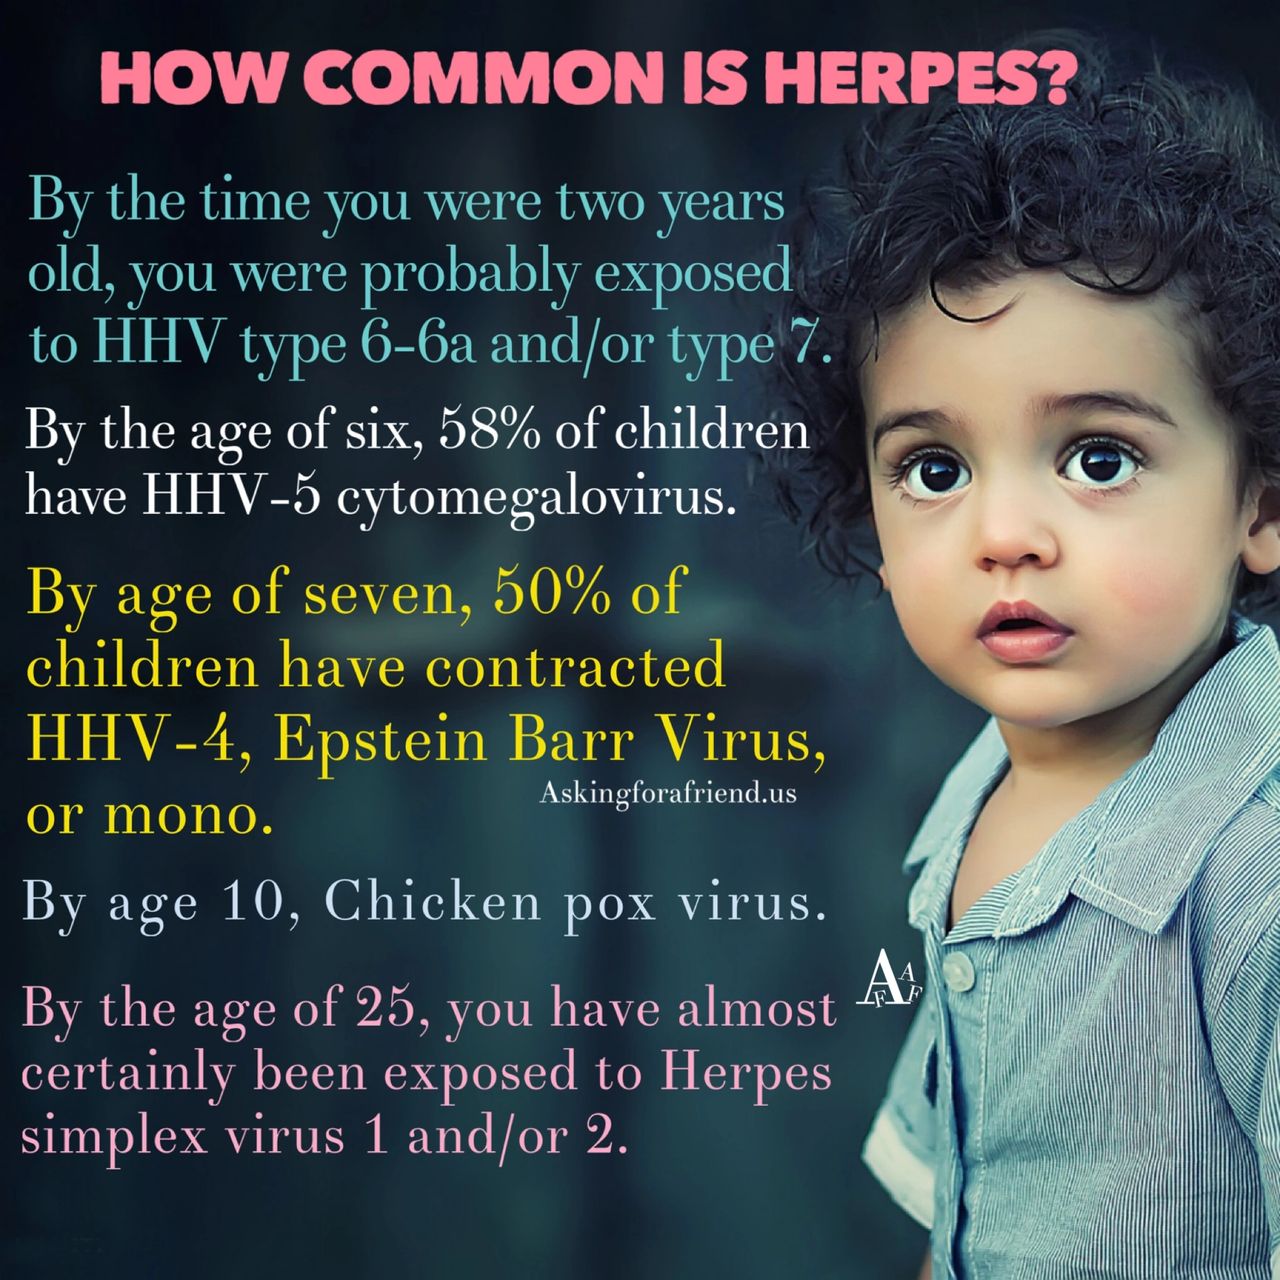 Exposure to herpes, what does it mean?